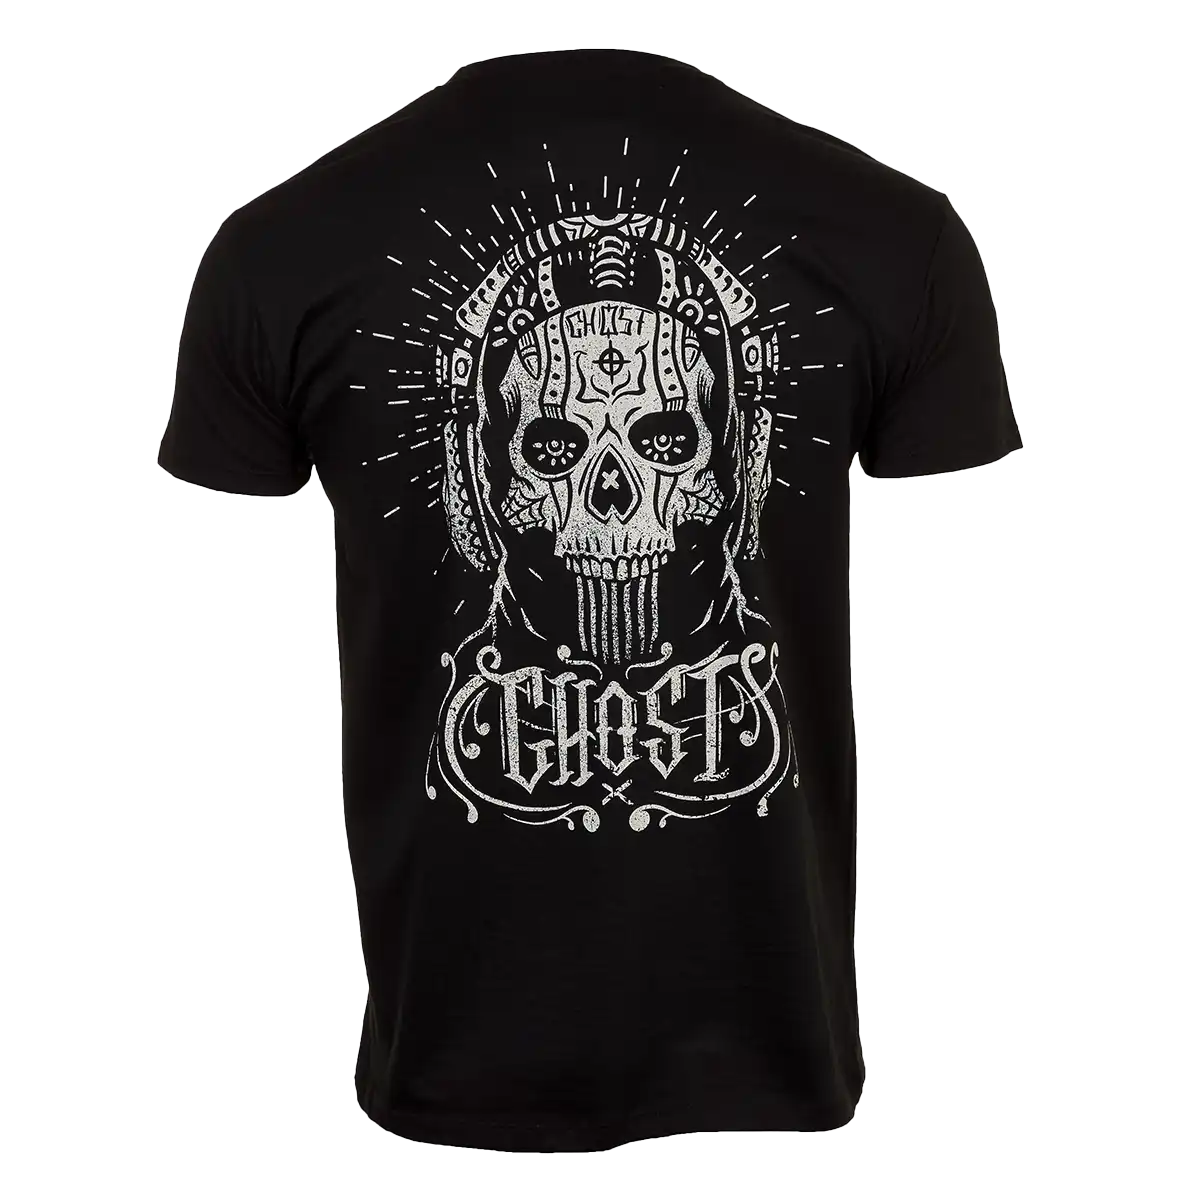 Call of Duty T-Shirt "Ghost" Black L Image 2